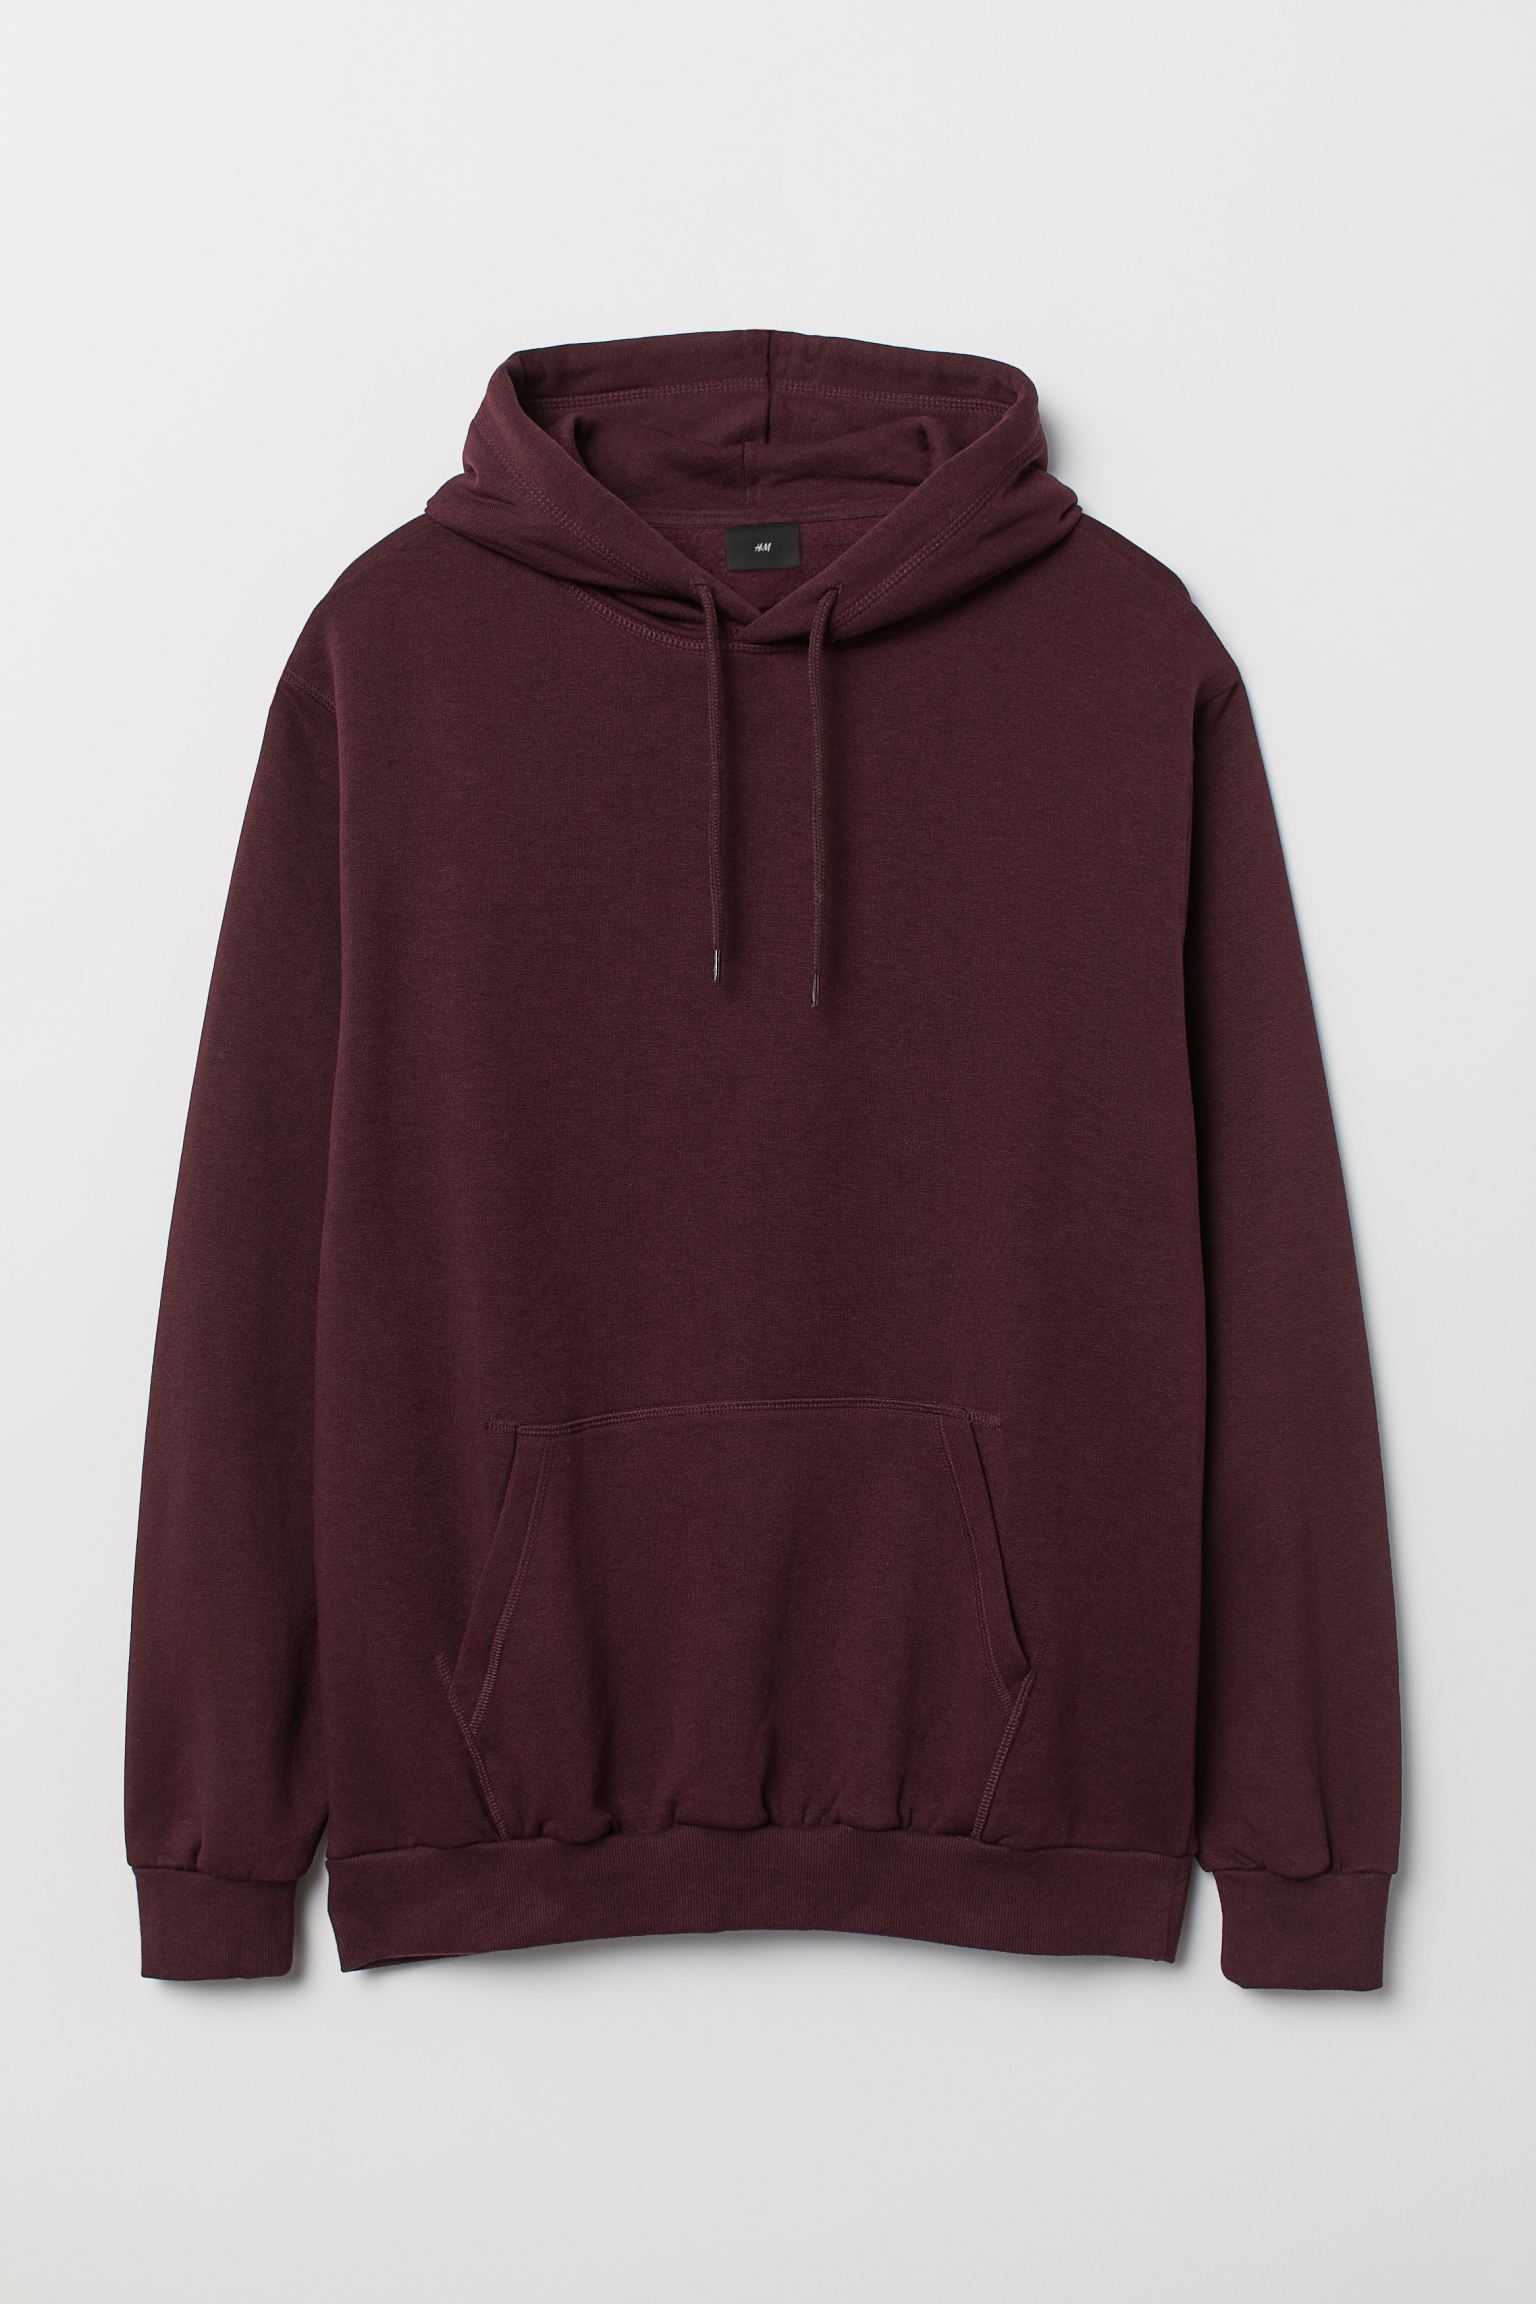 Кофты h. Худи Relaxed Fit h m. Худи регуляр фит h m. Худи цвета бургунди h&m. Hoodie HM Relaxed Fit женская.